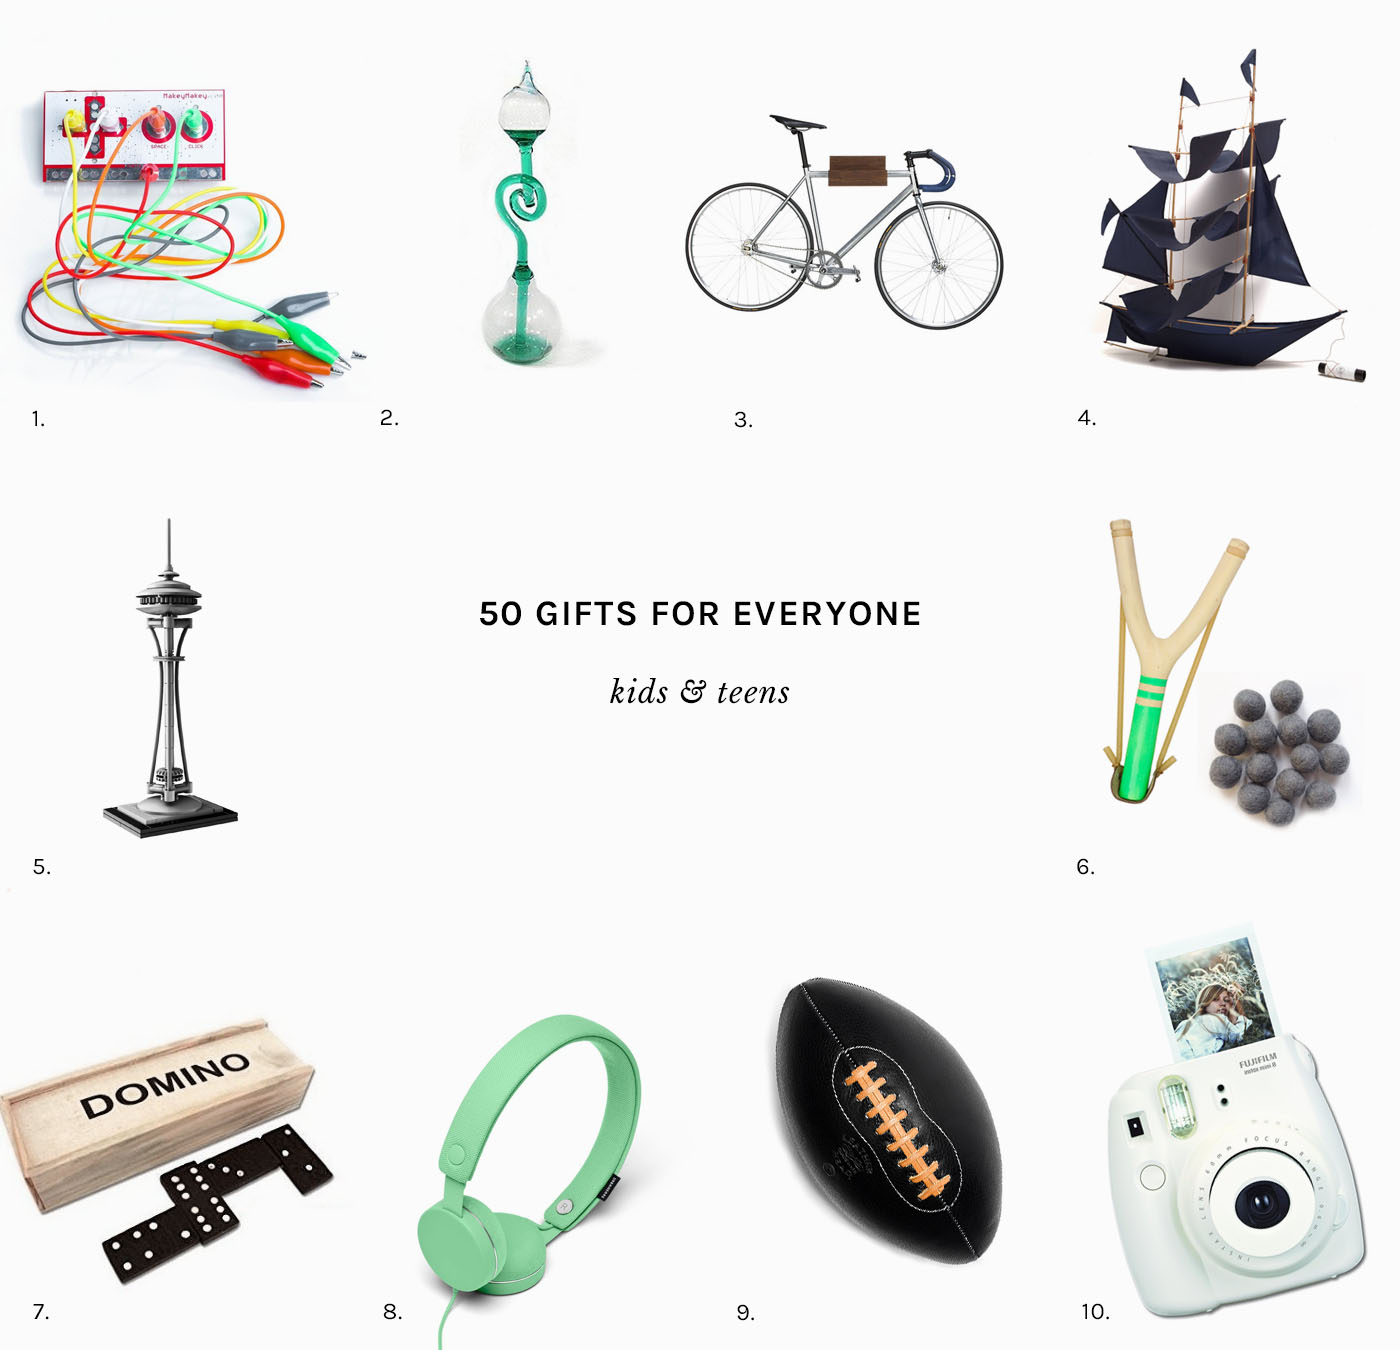 Perfect gifts for the cool kids & teens in your life. Part of a well-curated gift guide for everyone in your life.